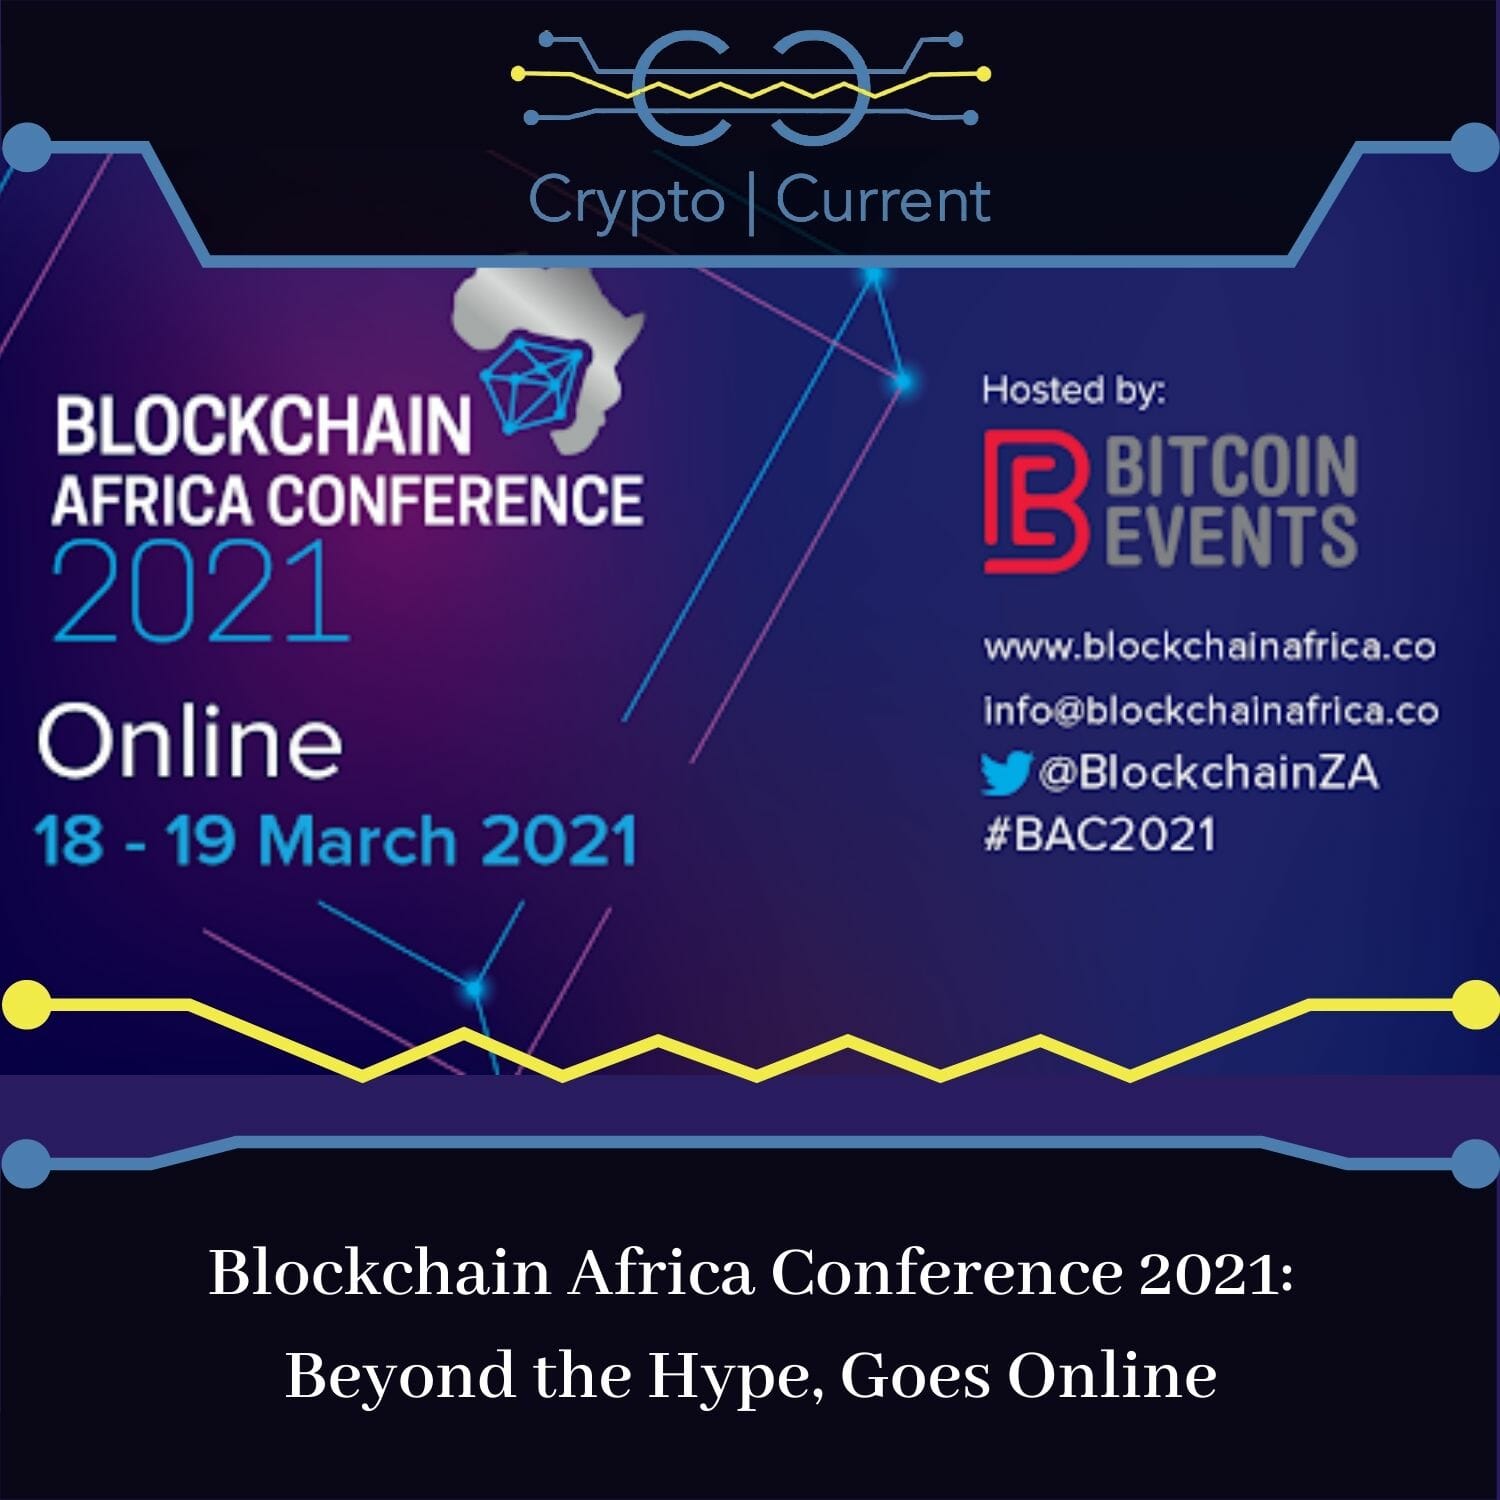 Blockchain Africa Conference 2021 organisers, Bitcoin Events, have announced that due to the global coronavirus pandemic and restrictions on travel and the uncertainty of the current environment, the 7th annual conference, will be hosted online this year.